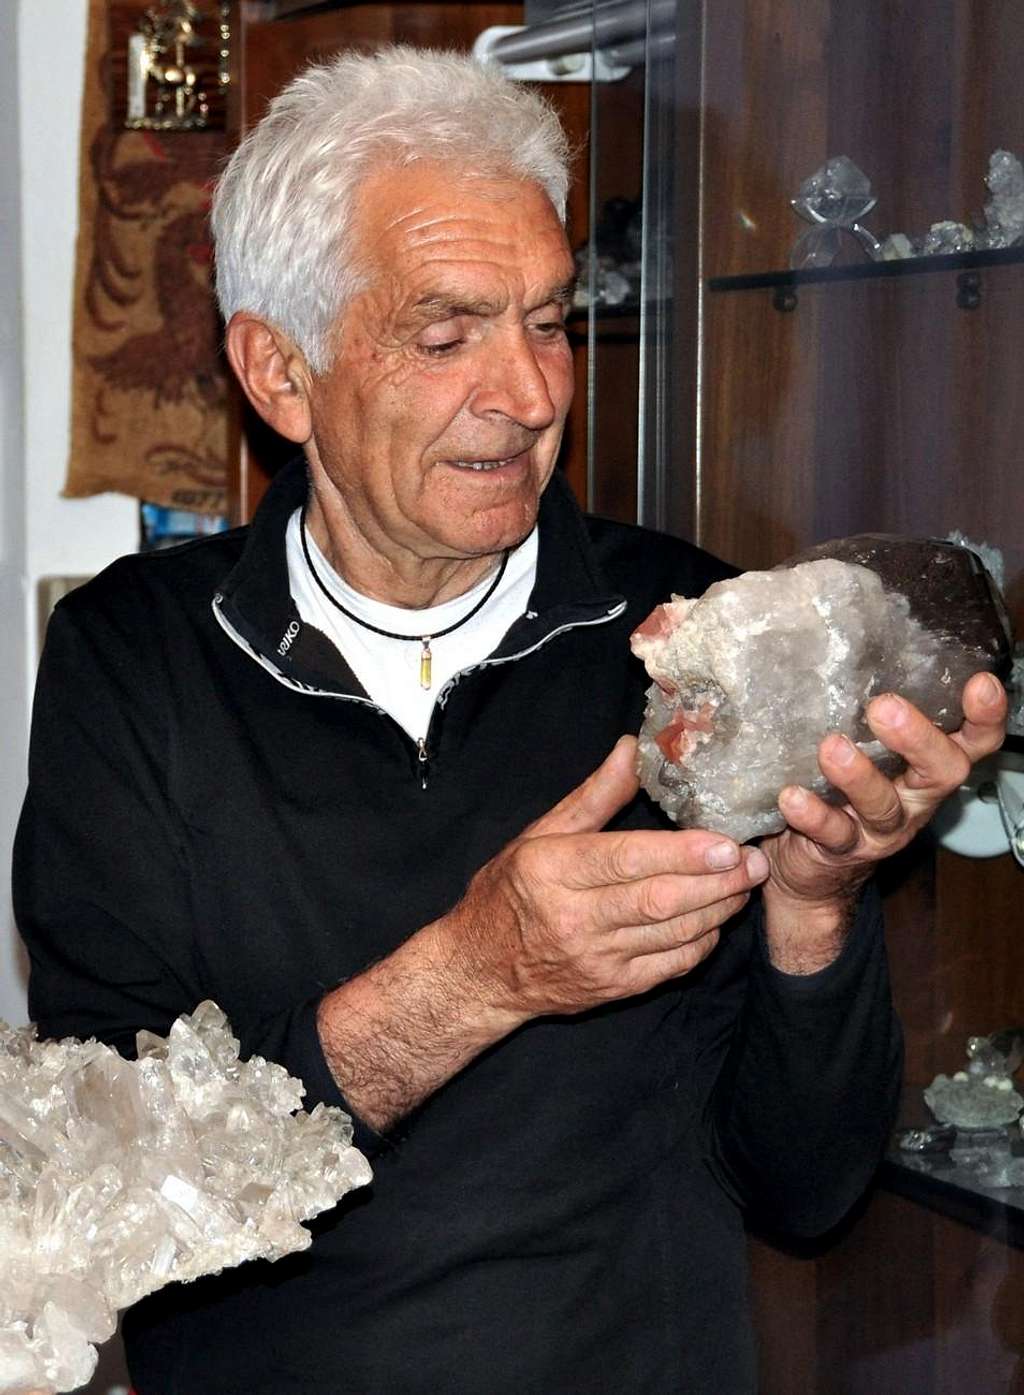 CRYSTALS OF THE MONTE BIANCO (Lucianaz's Collection or Third Part)